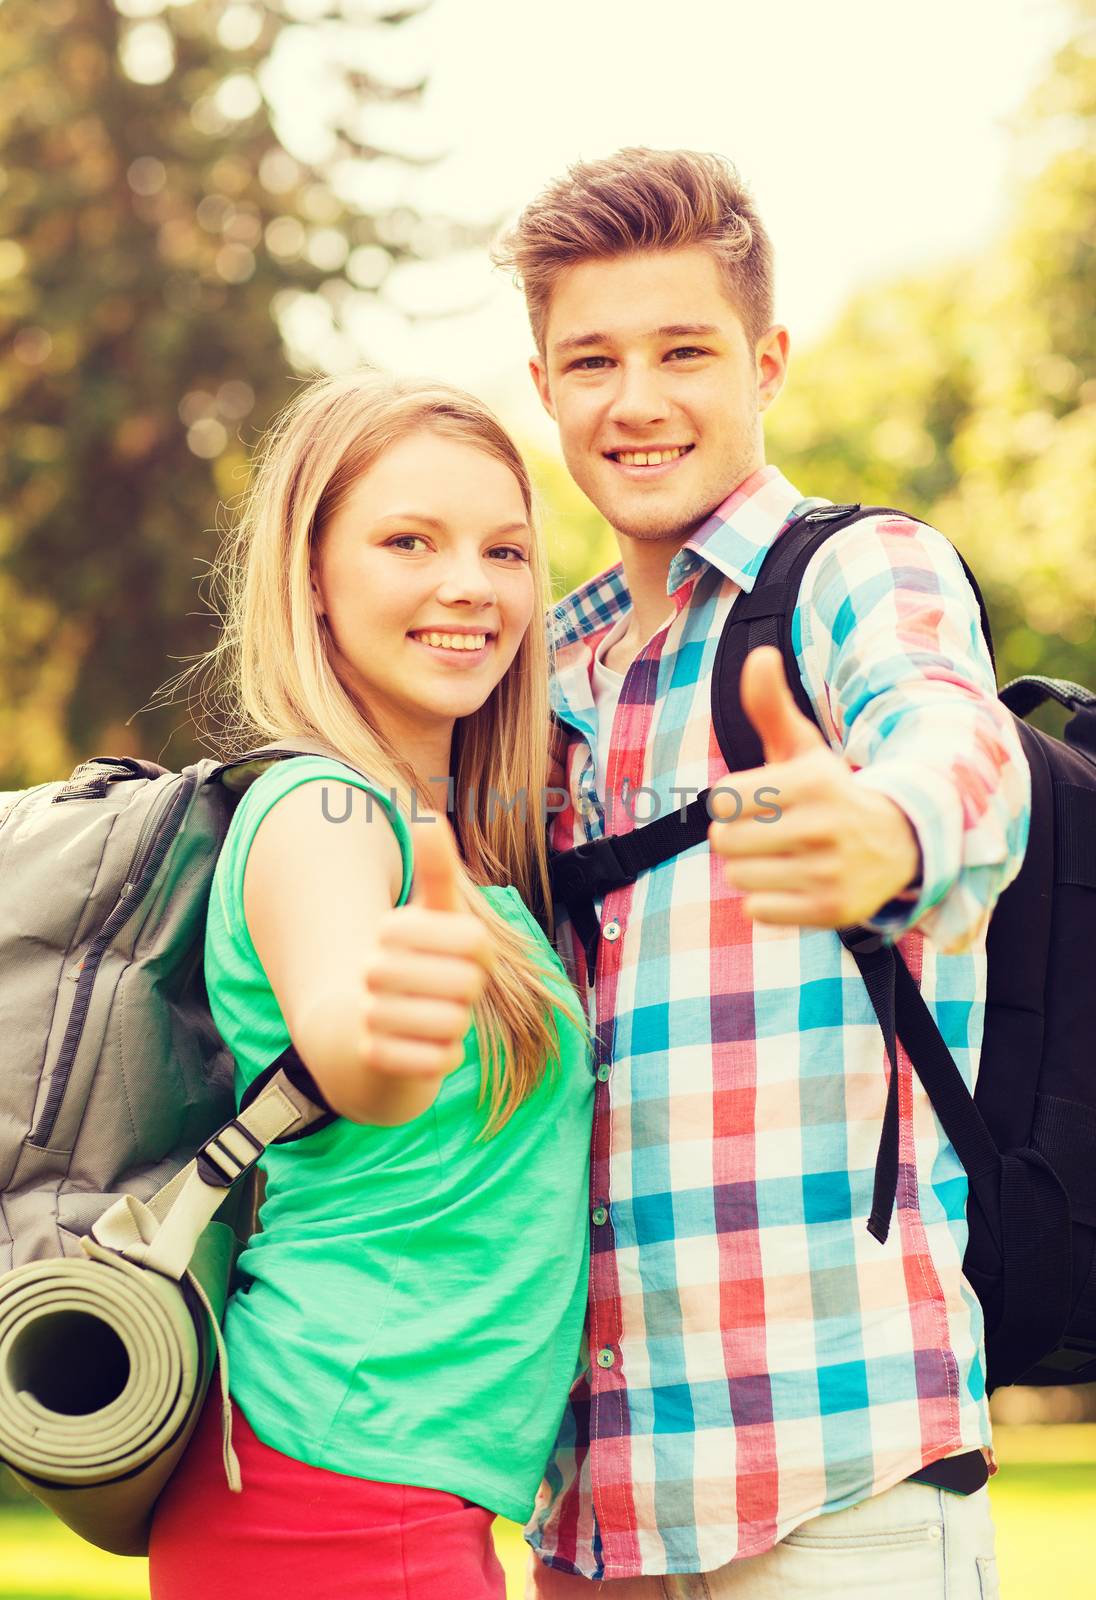 travel, vacation, tourism, gesture and friendship concept - smiling couple with backpacks showing thumbs up in nature